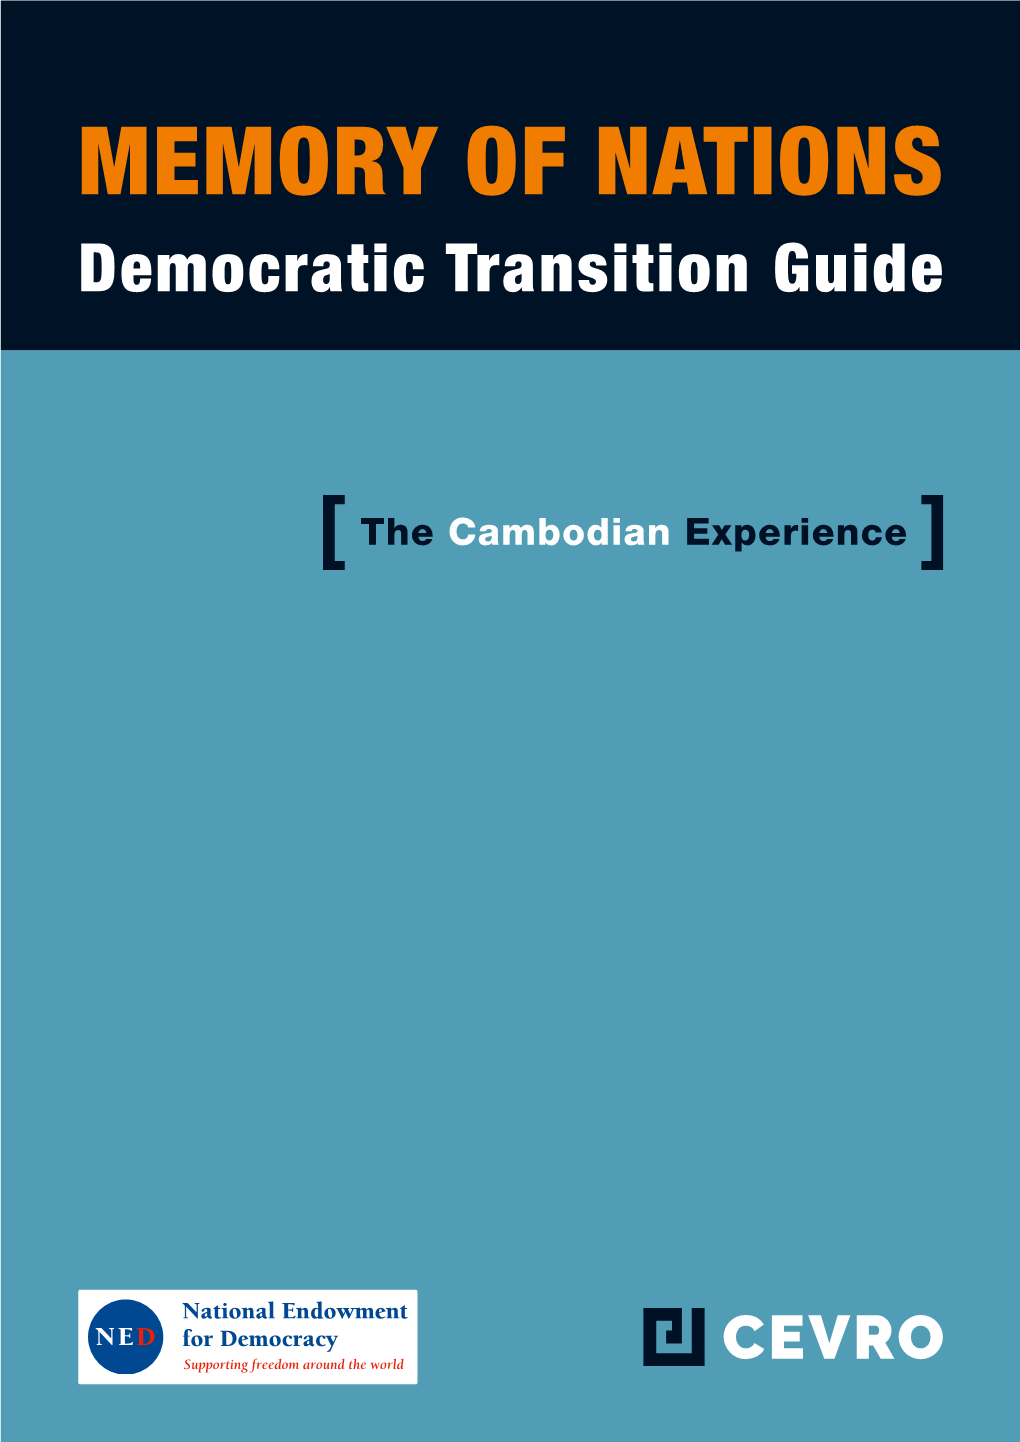 Memory of Nations: Democratic Transition Guide” (ISBN 978-80-86816-39-5)